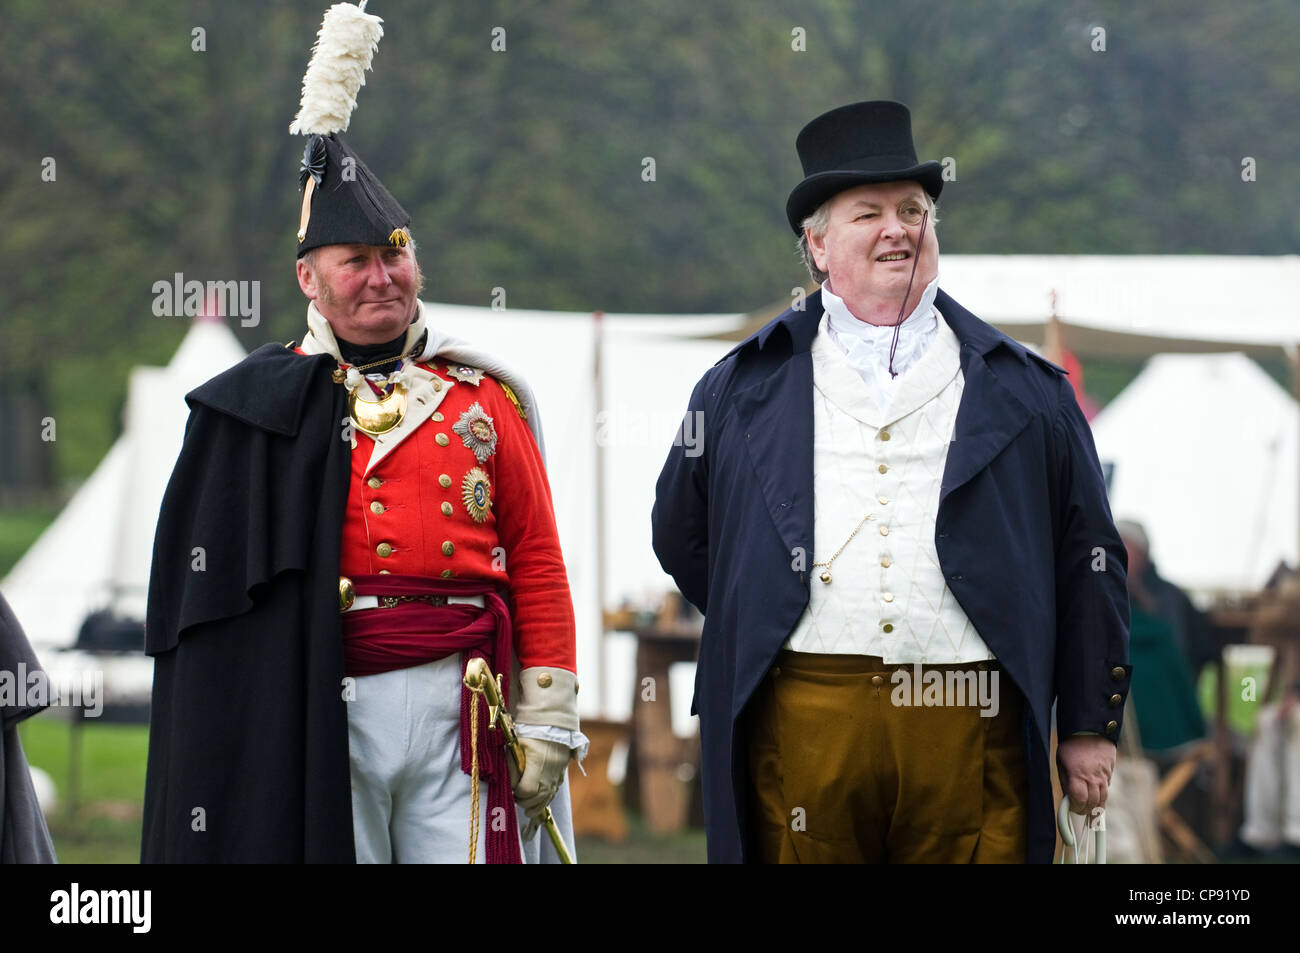 High ranking officer and civilian dressed in period costume from the Napoleonic war at a re-enactment society day Stock Photo